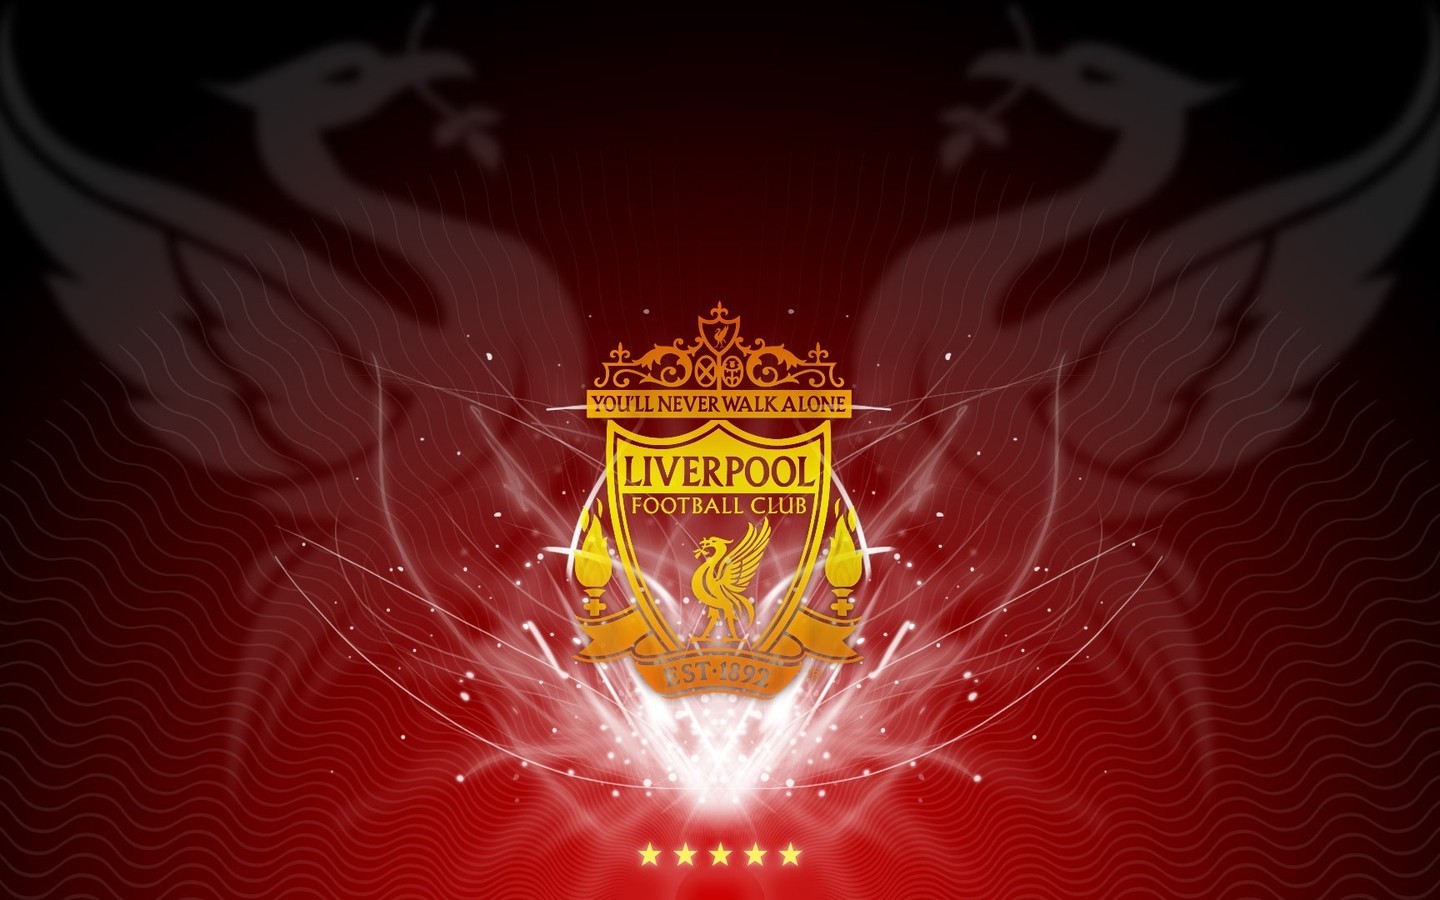 liverpool, football, sports, brands, logos, red